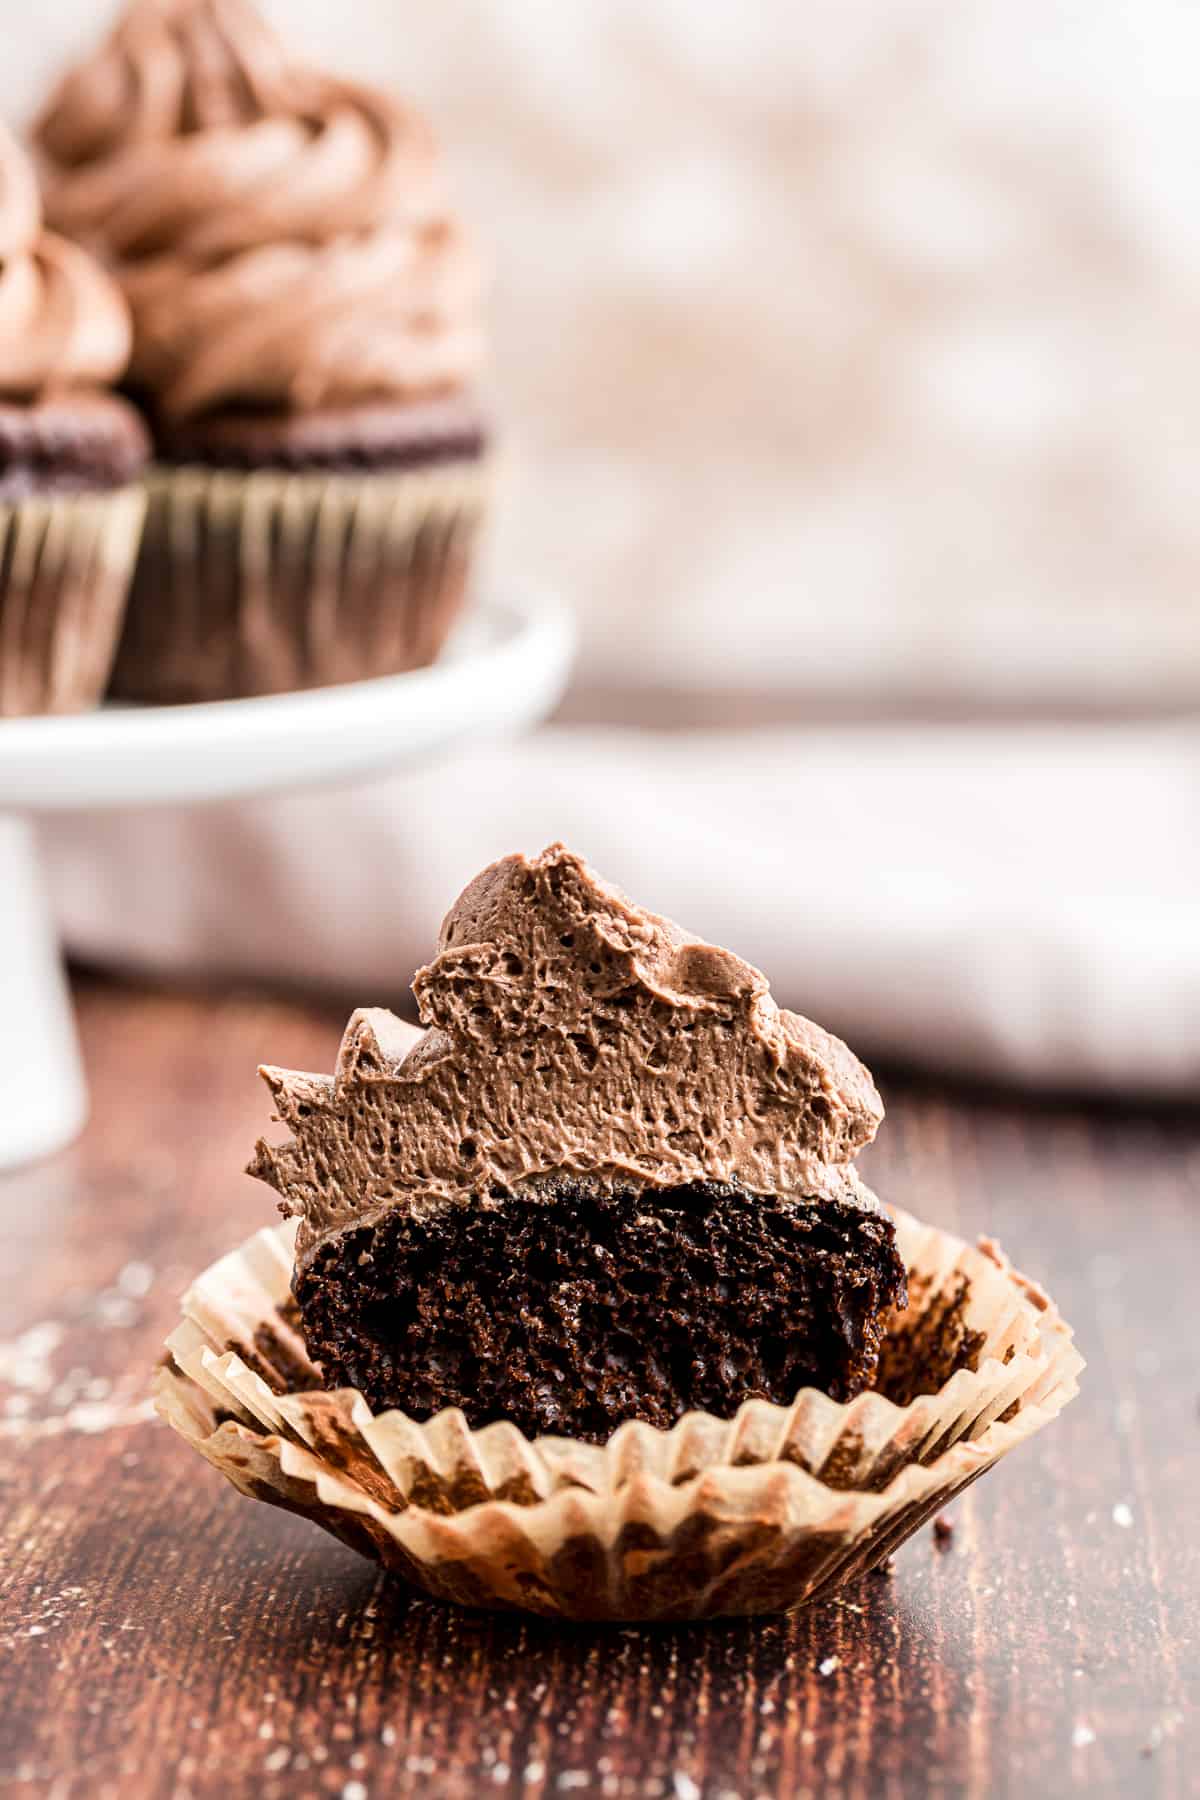 chocolate cupcake cut in half showing buttercream icing texture